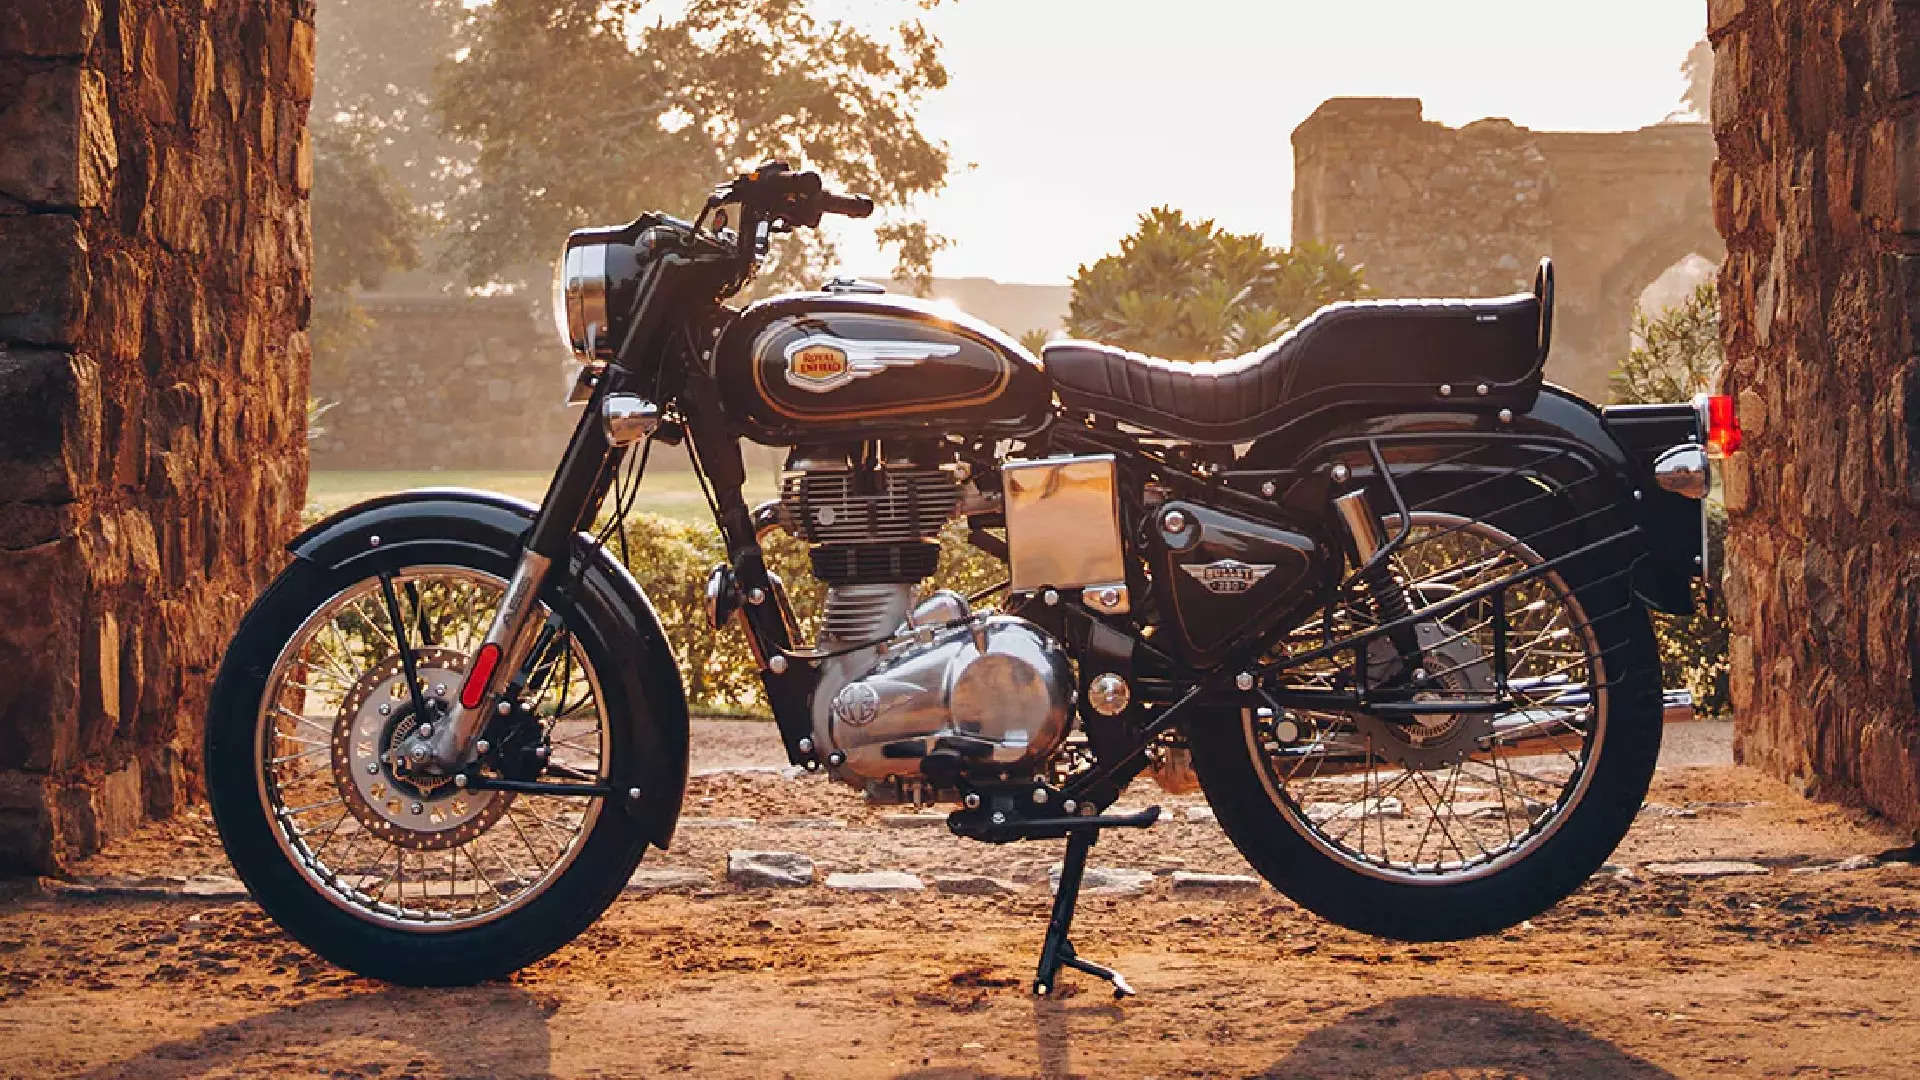 Royal Enfield Bullet 350 for just Rs 18,700! Here's how